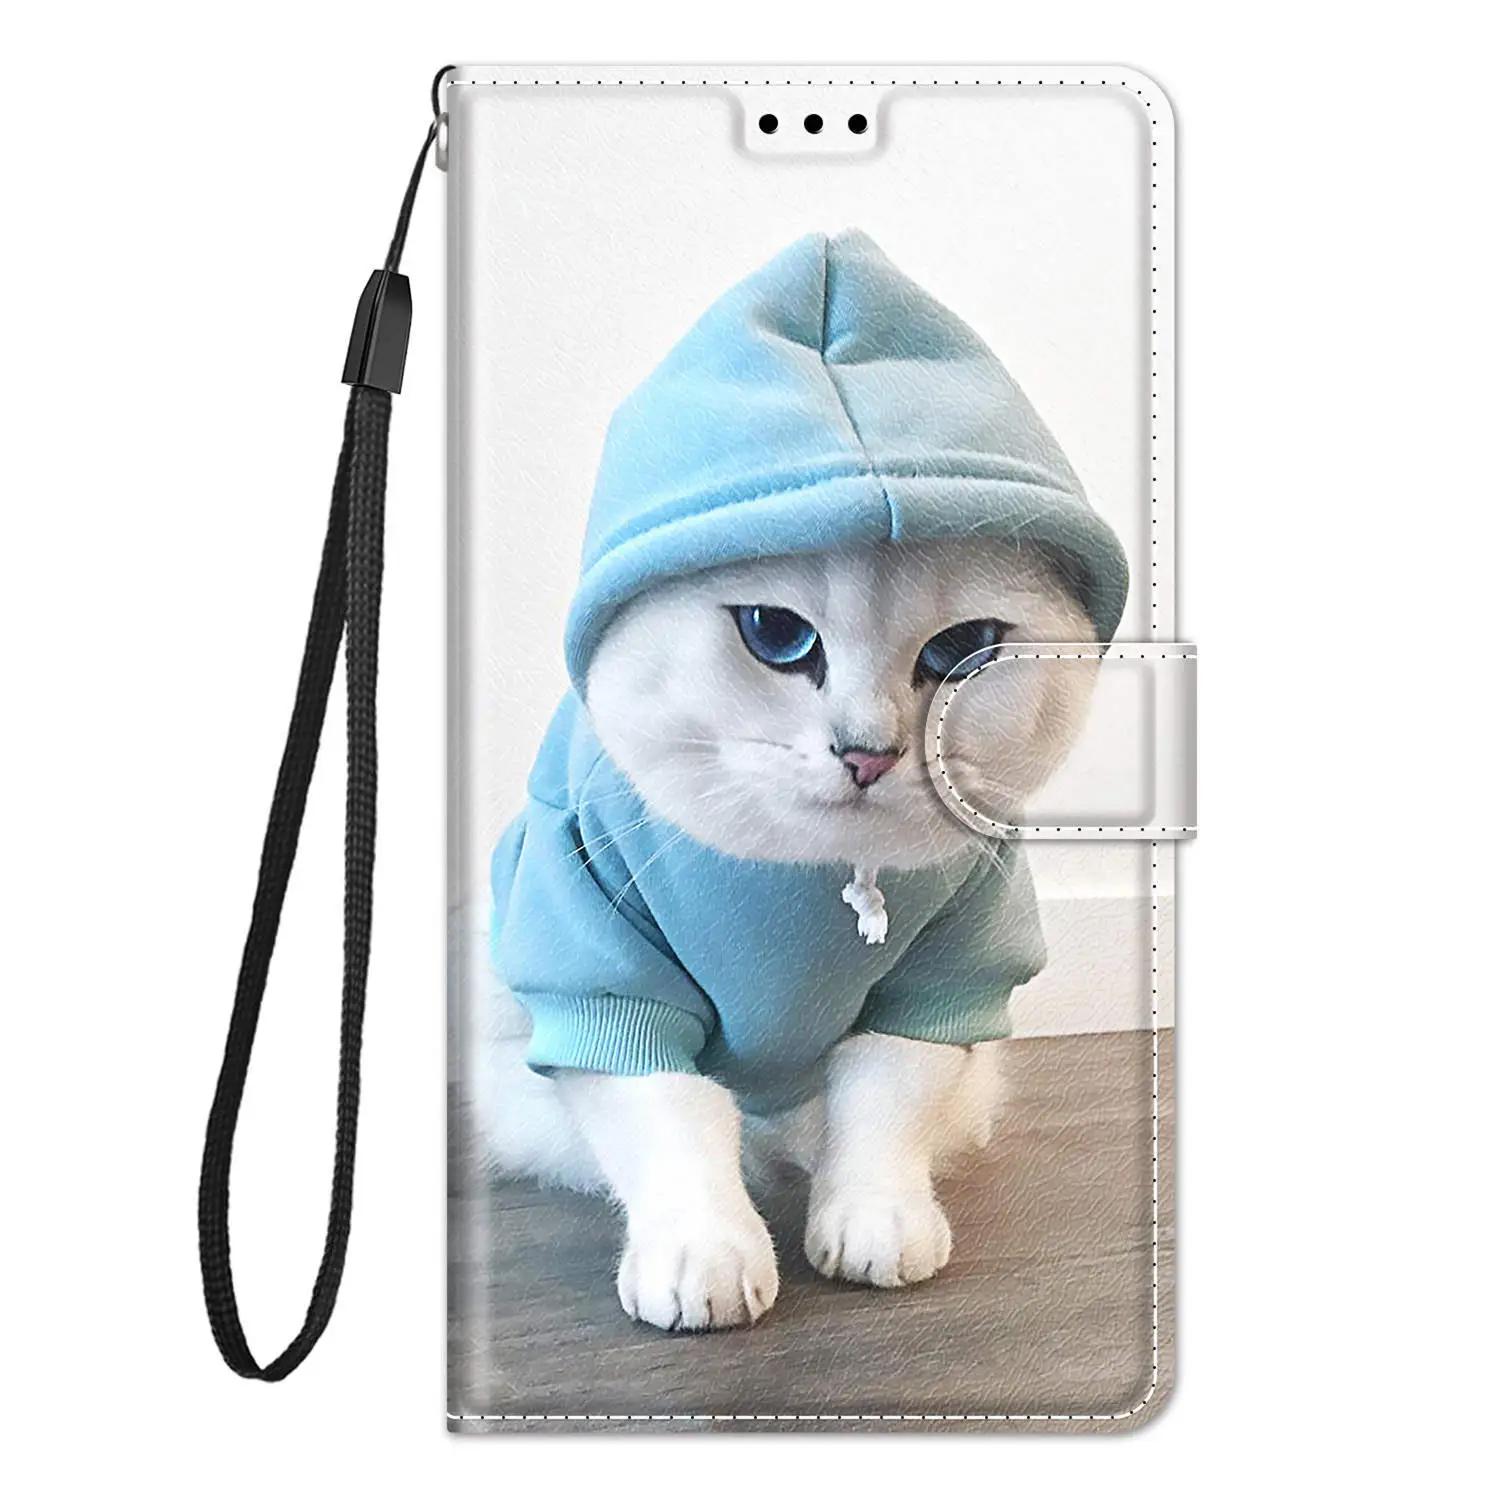 samsung silicone cover For Samsung Galaxy A51 Cute Panda Leather Flip Case Coque A10 A20e A30 A30S A40 A50 A70 A21s A11 A12 A71 Phone Wallet Cover Etui best case for samsung Cases For Samsung